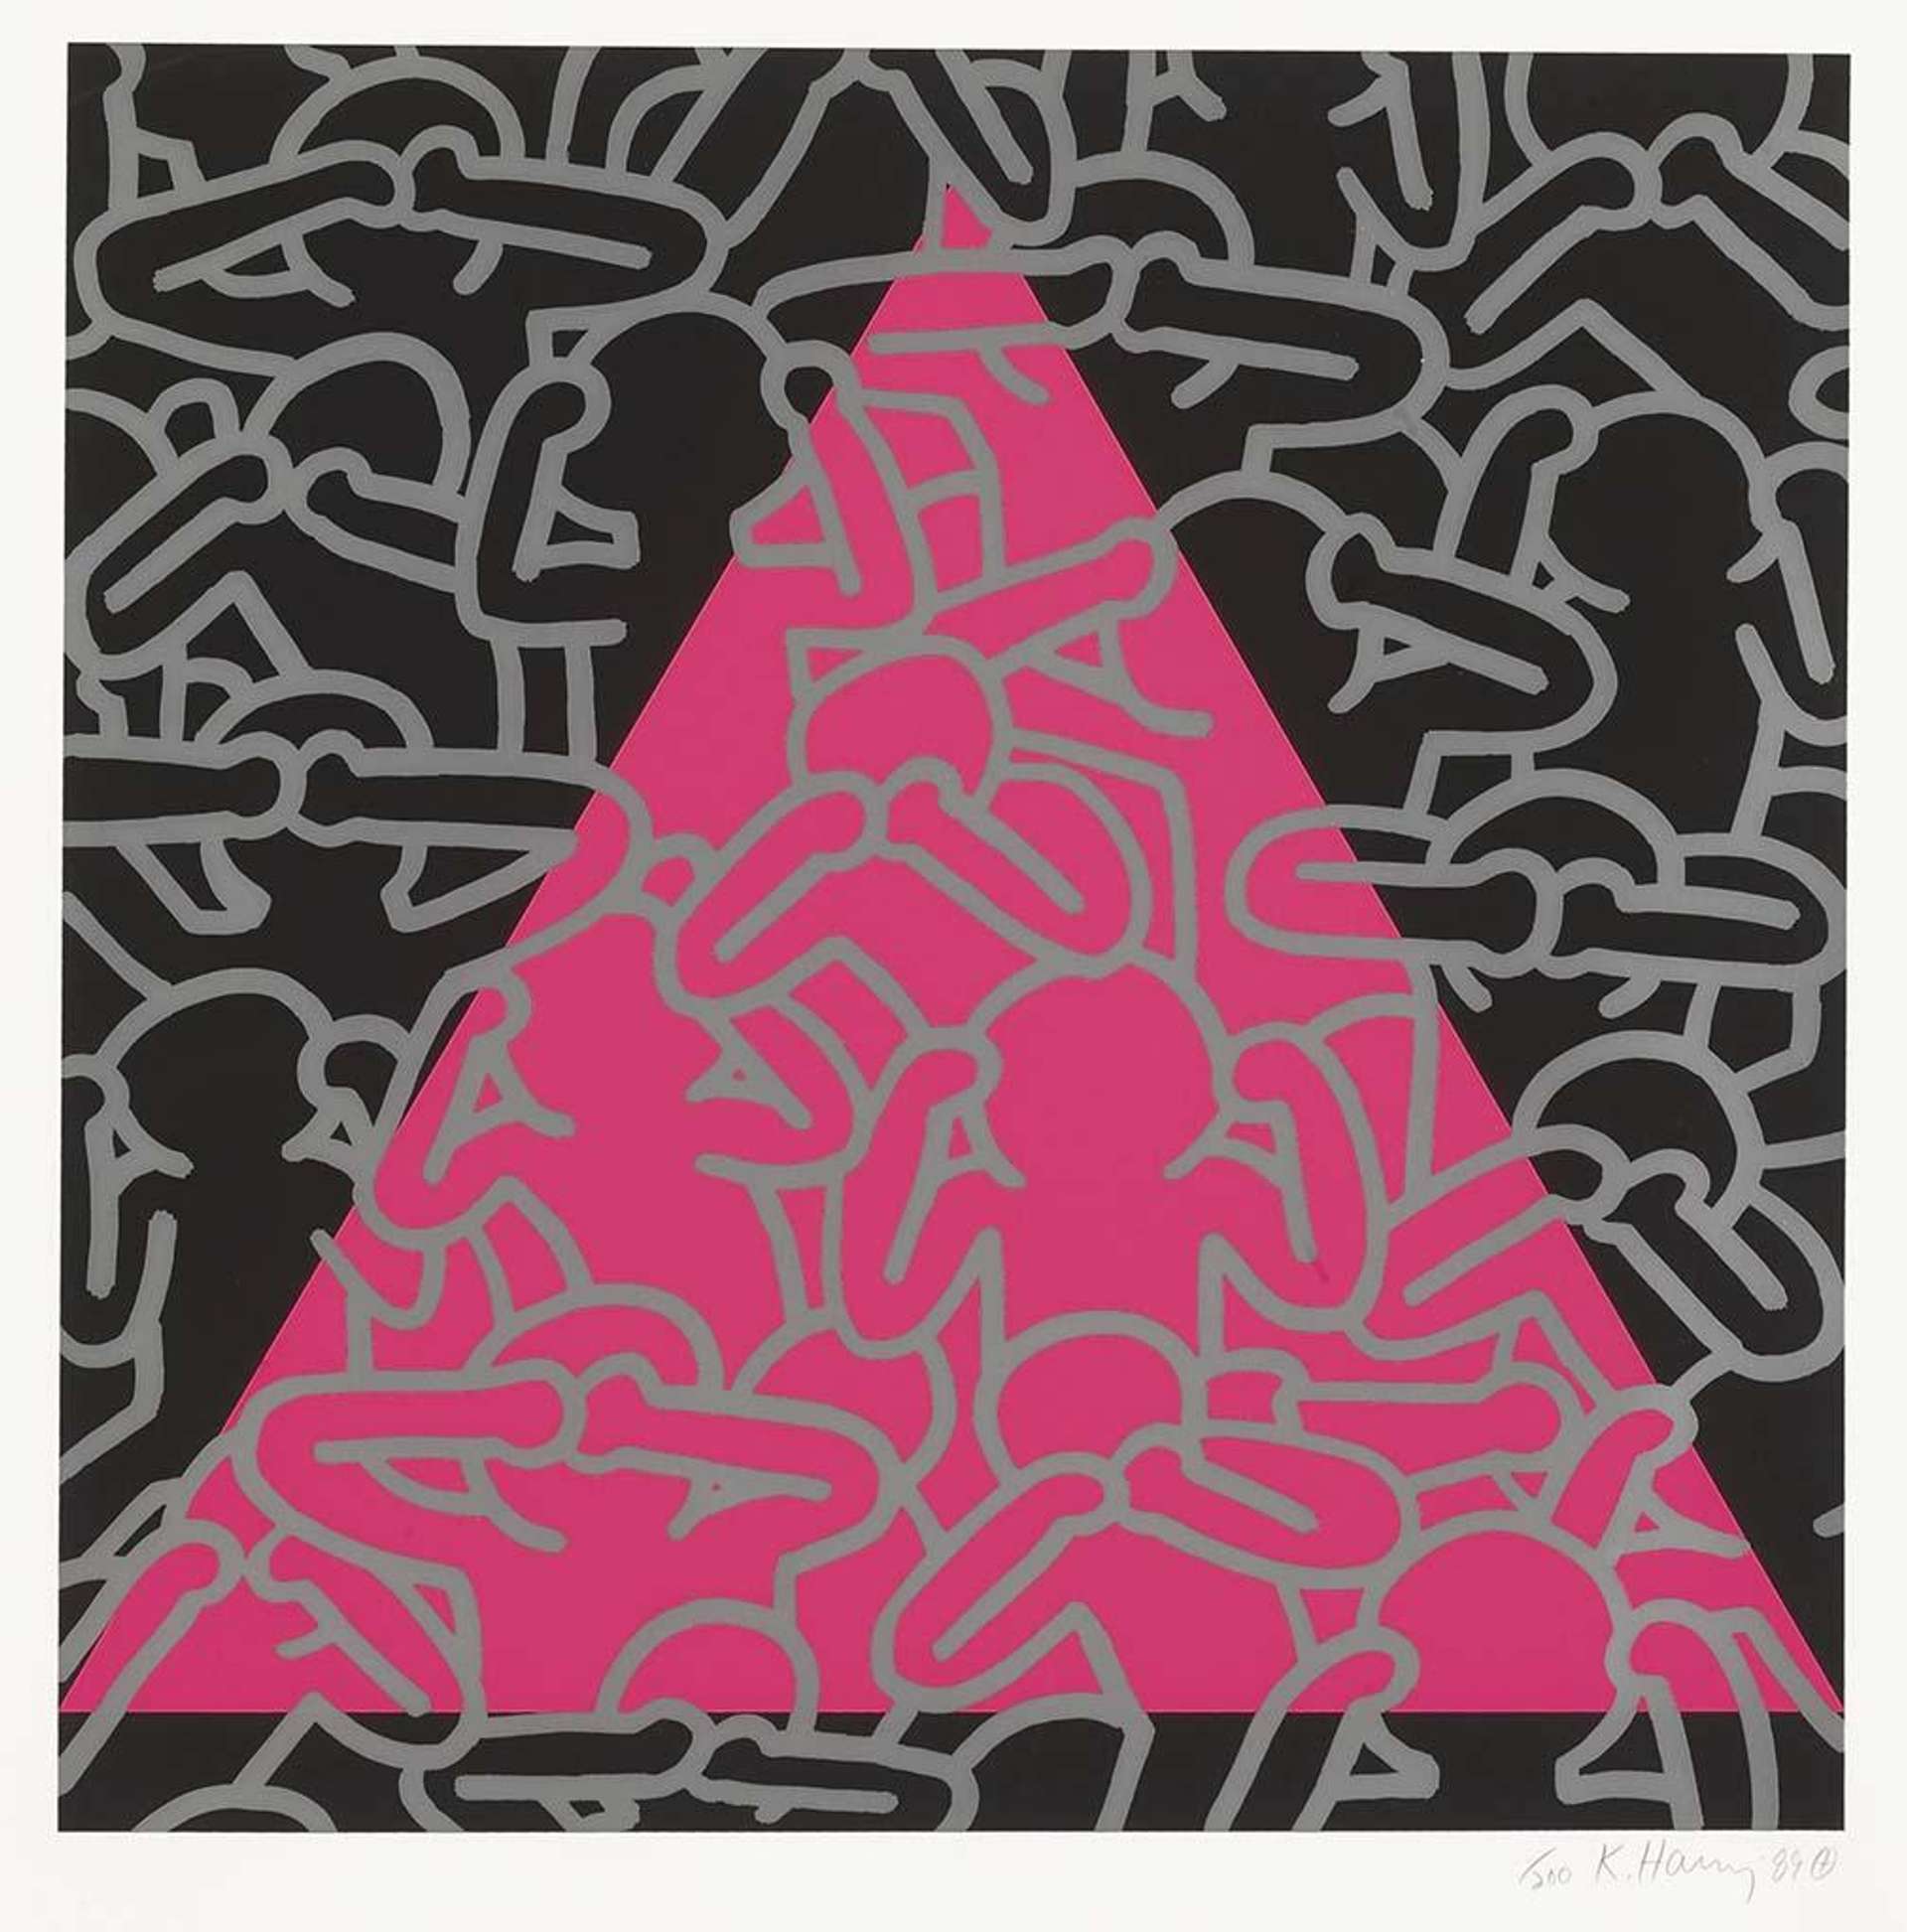 Silence Equals Death - Signed Print by Keith Haring 1989 - MyArtBroker